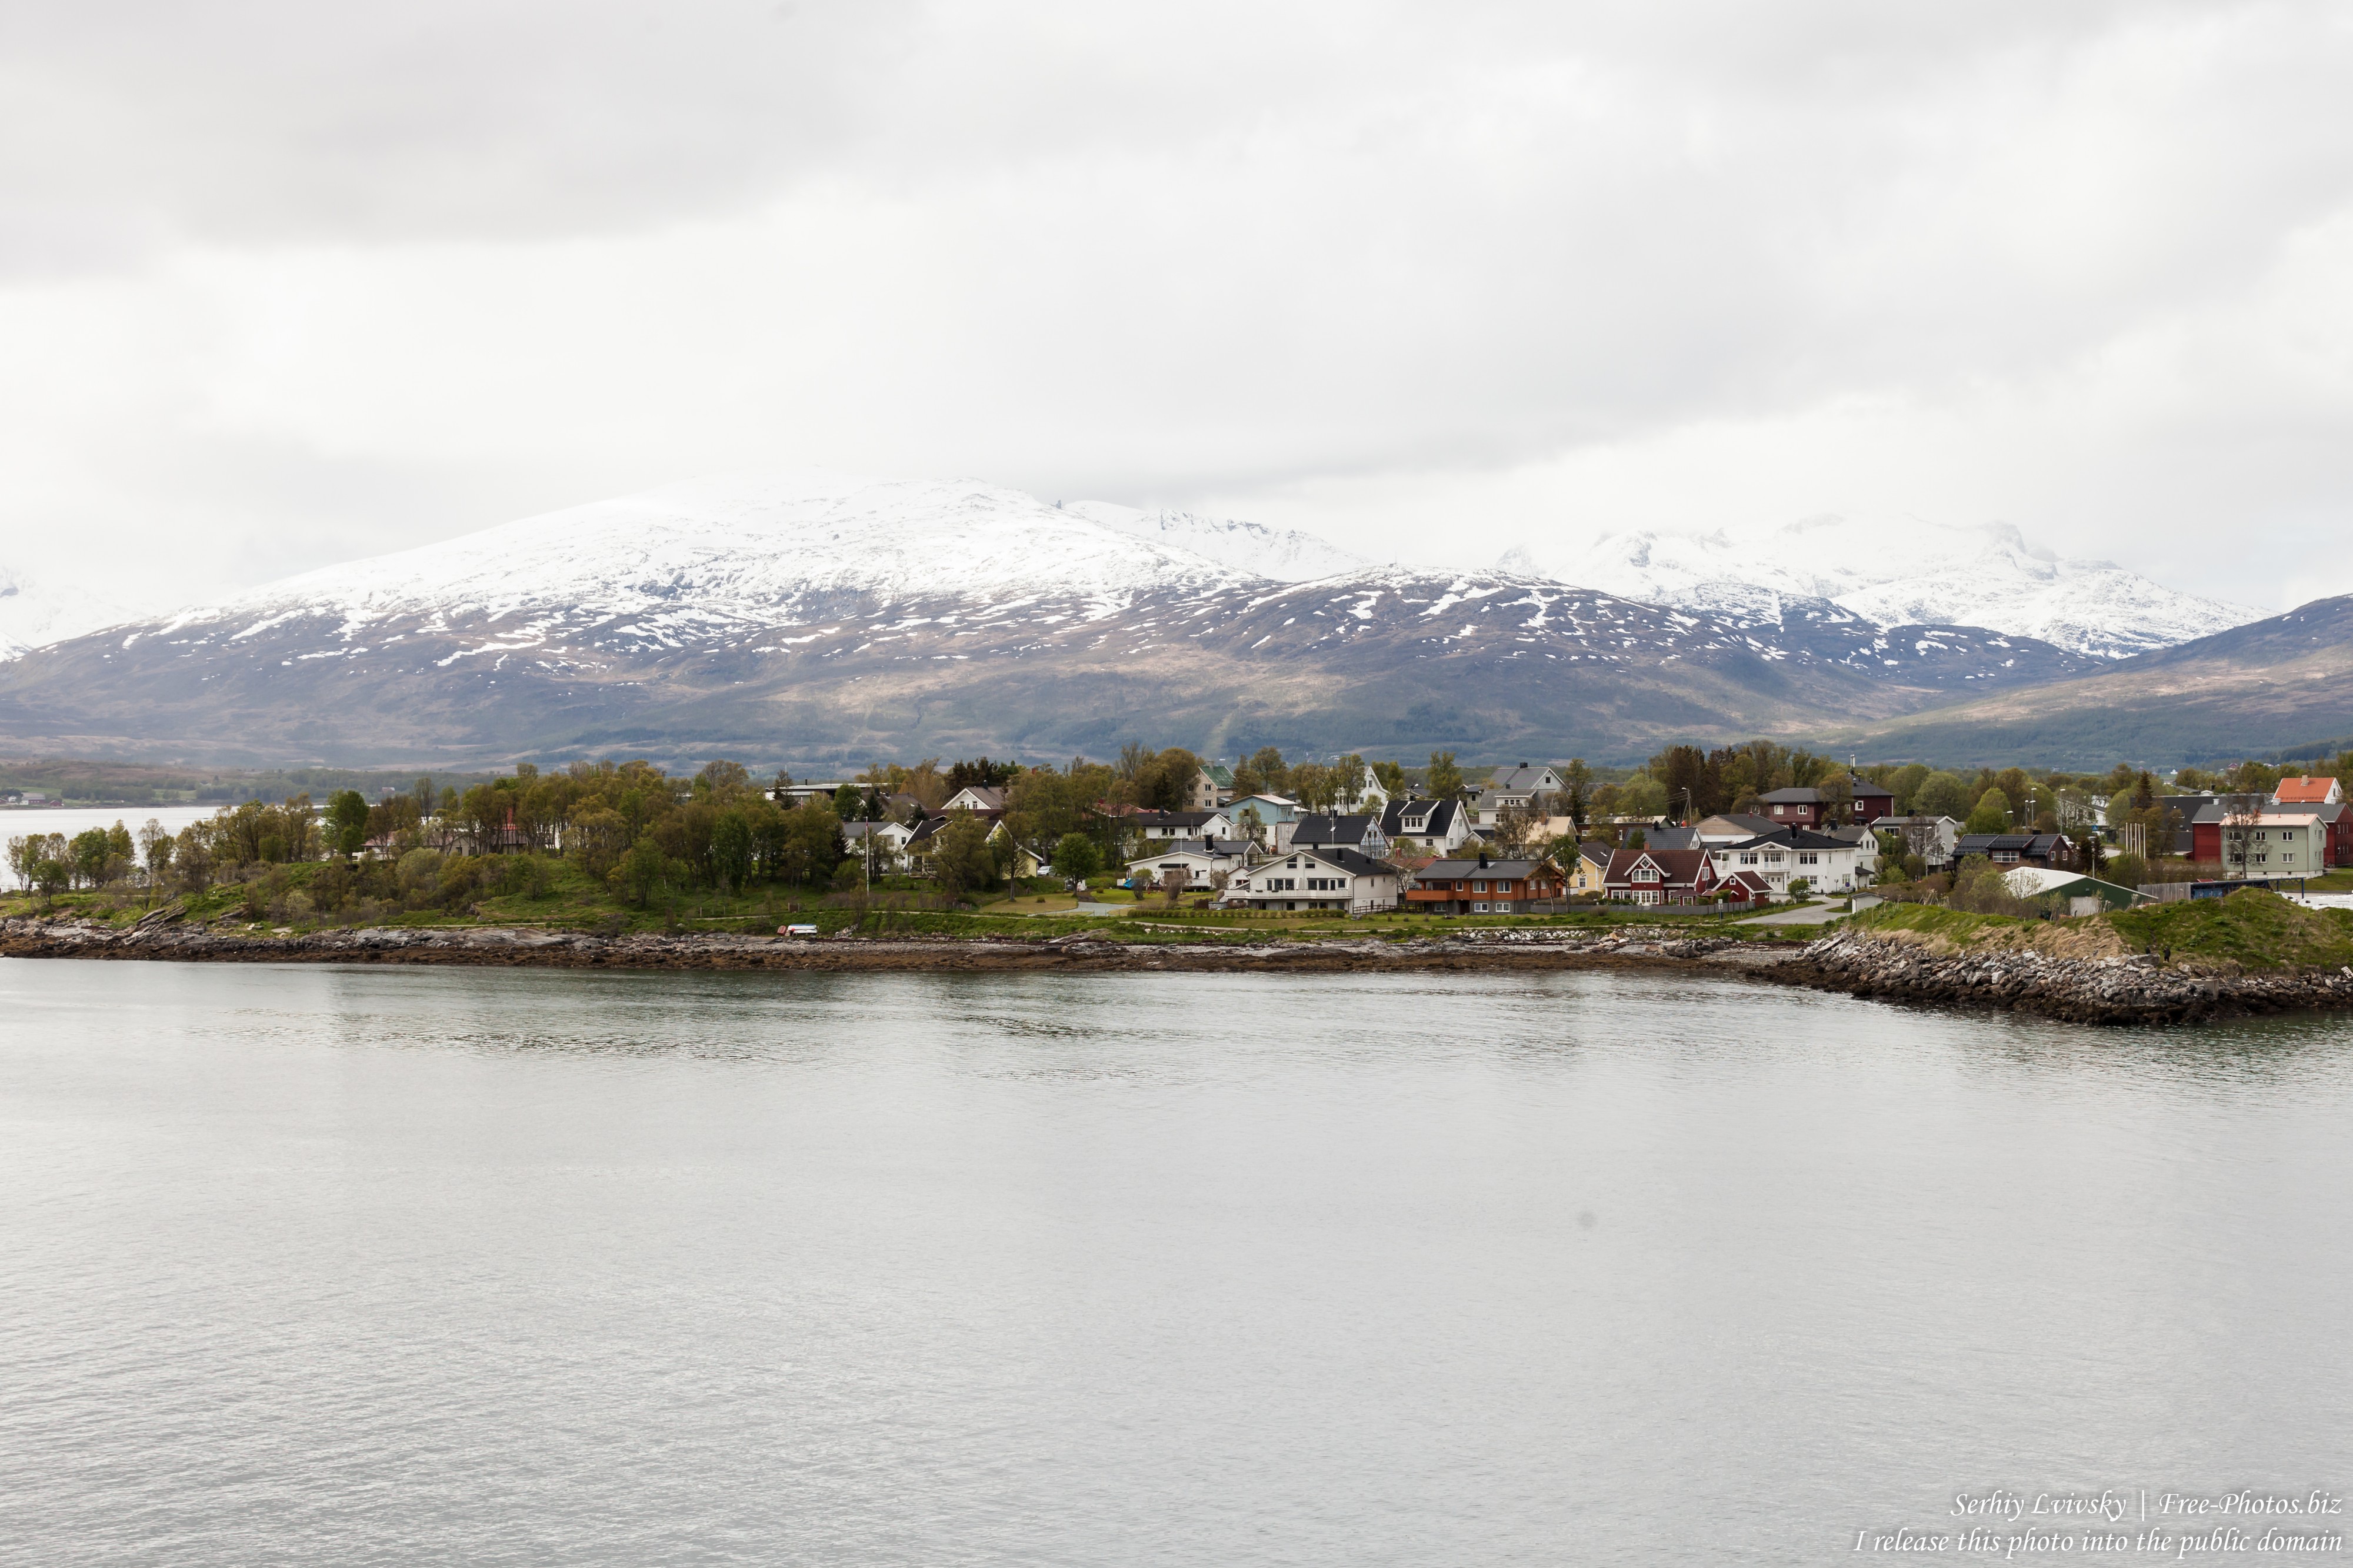 Tromso, Norway, photographed in June 2018 by Serhiy Lvivsky, picture 21